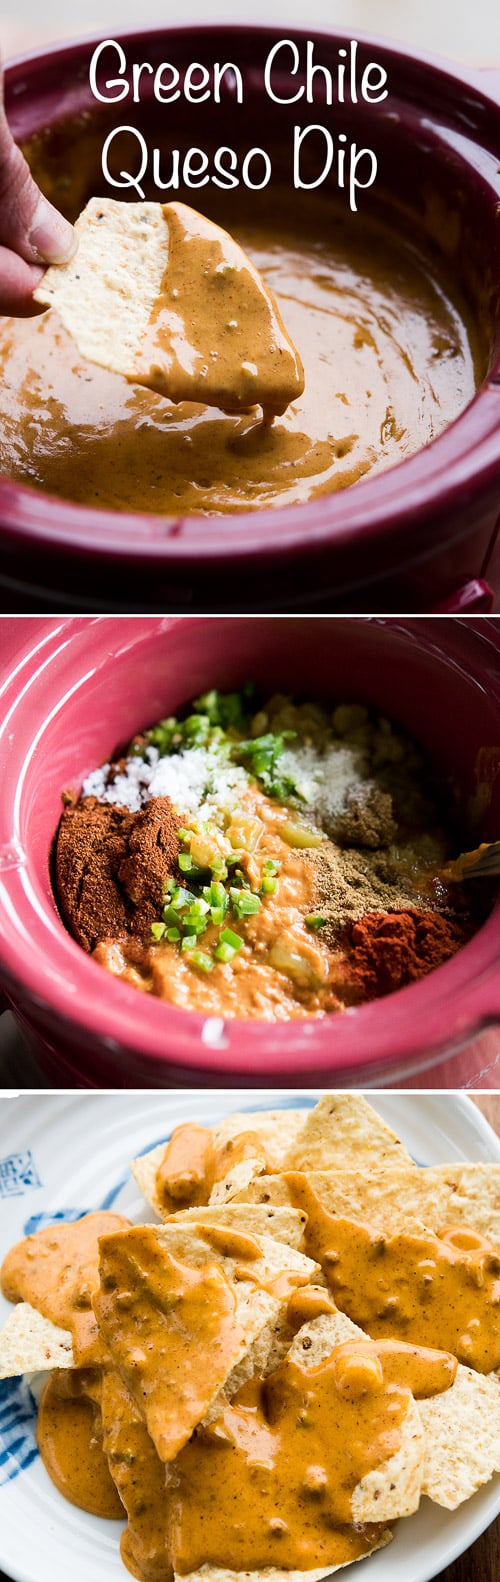 Slow Cooker Green Chile Queso Dip Recipe step by step 